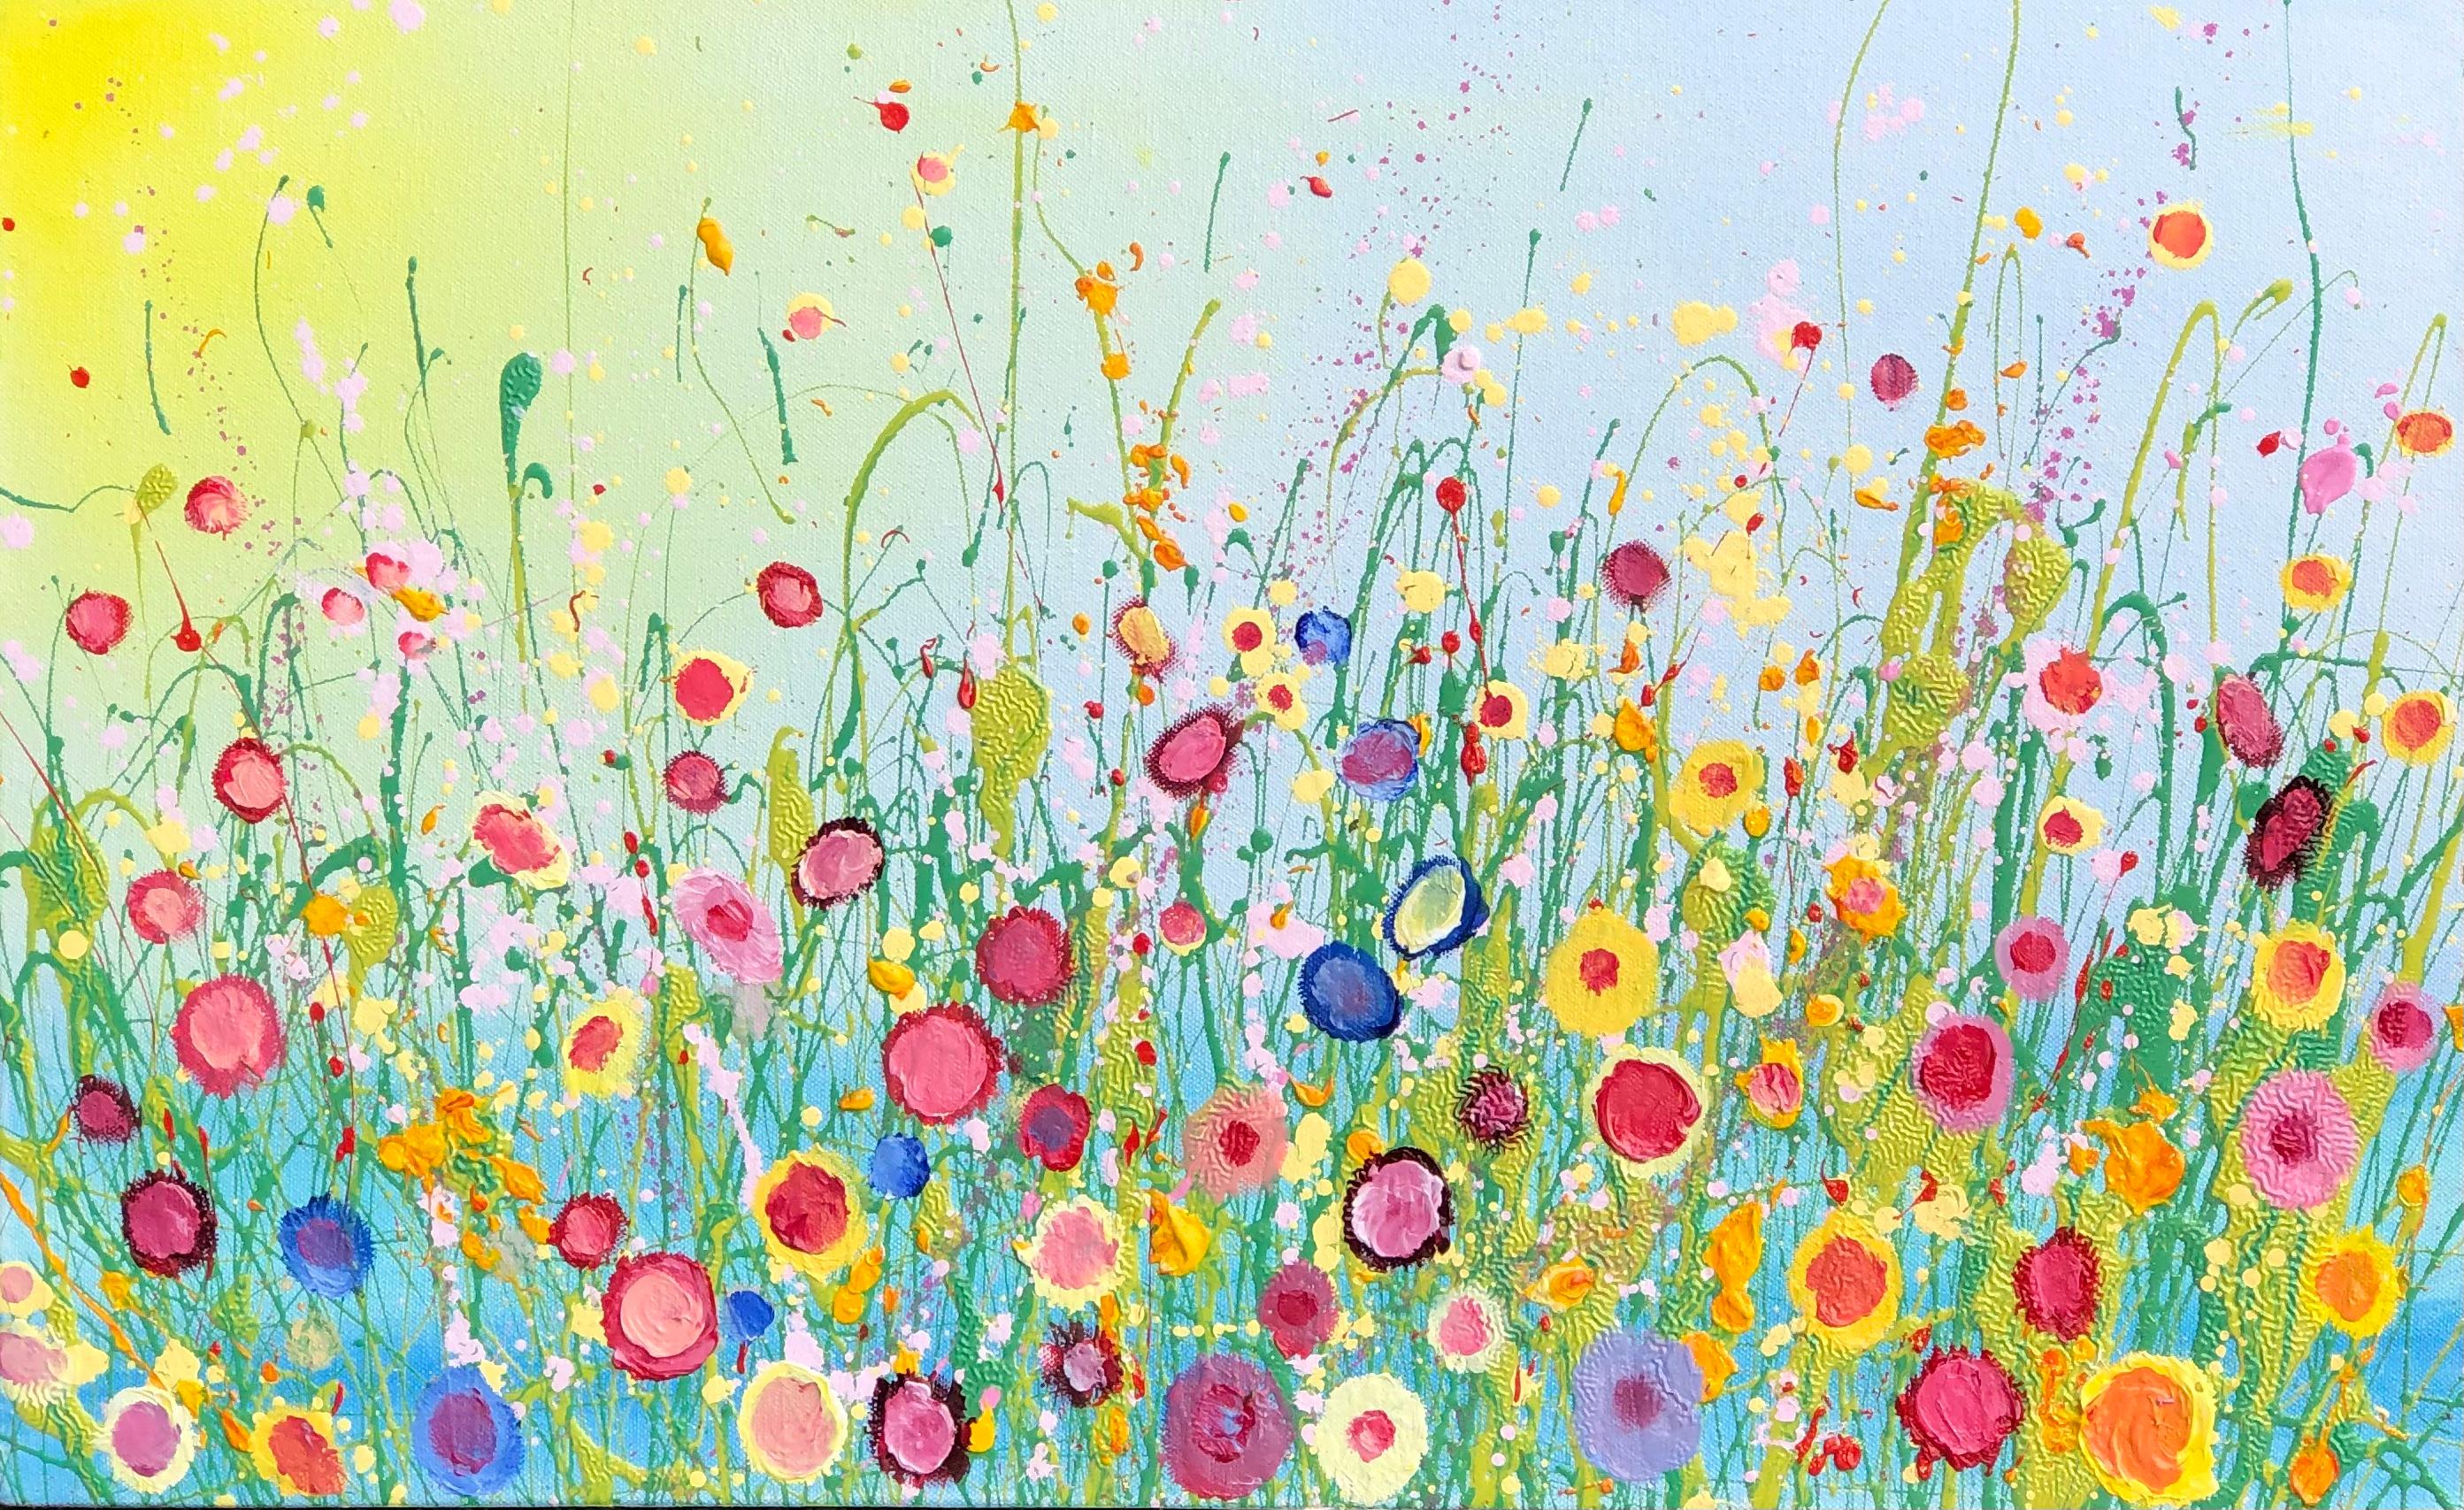 Rainbows of Love-original floral abstract landscape painting-contemporary Art